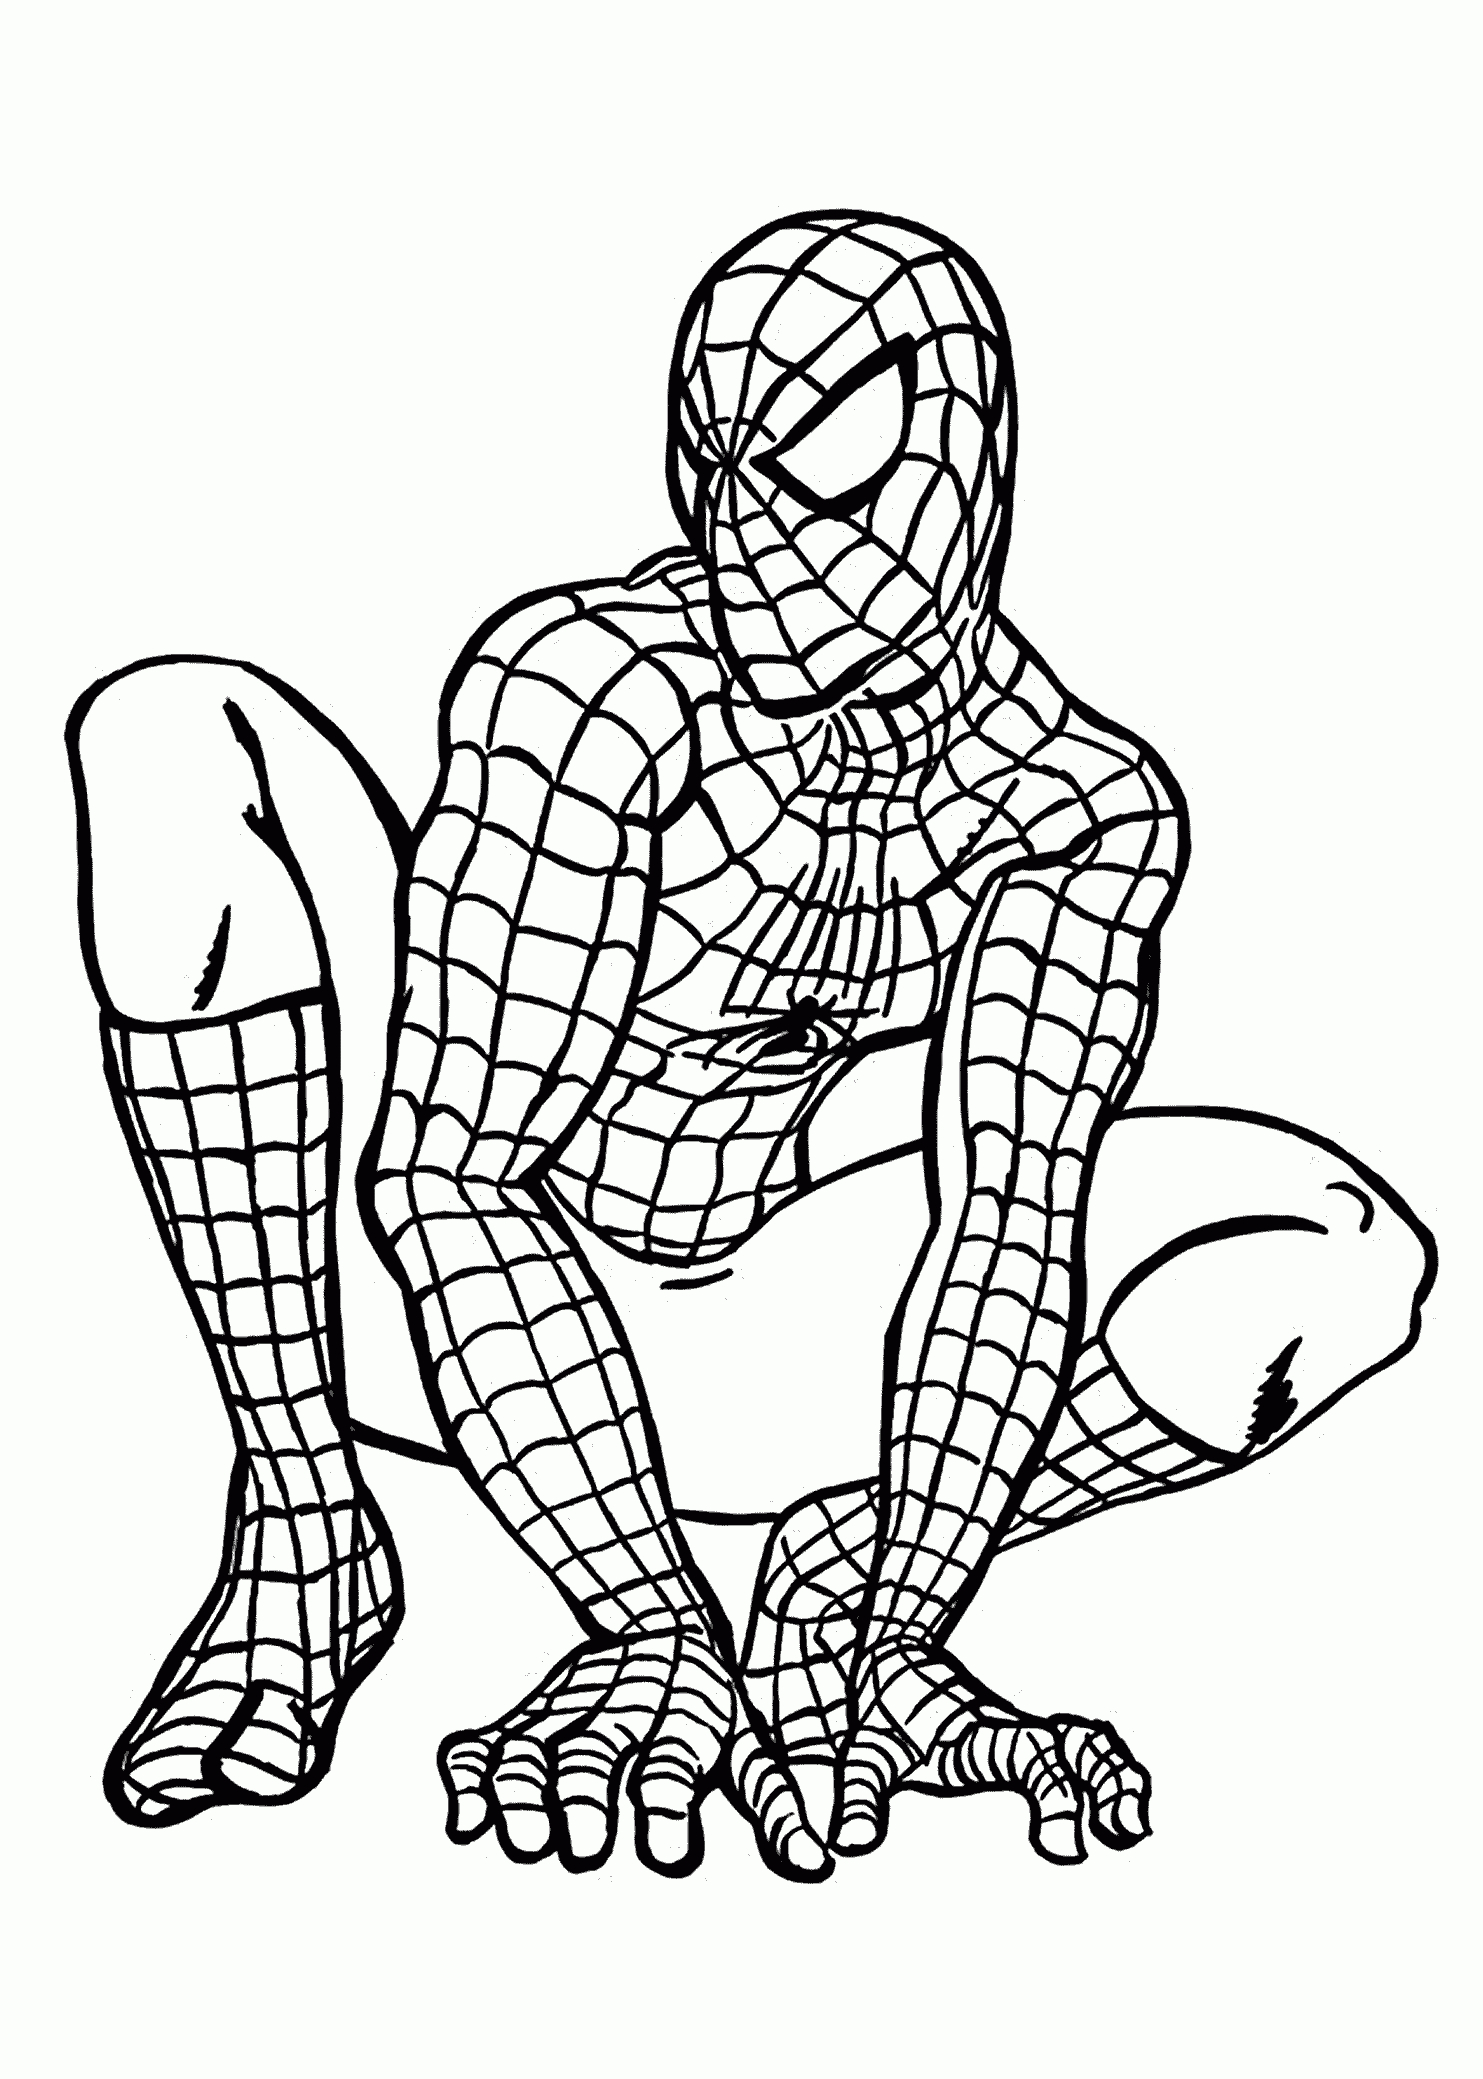 Spider Man Homecoming Coloring Pages Free Printable Spiderman - Free Printable Spiderman Coloring Pages